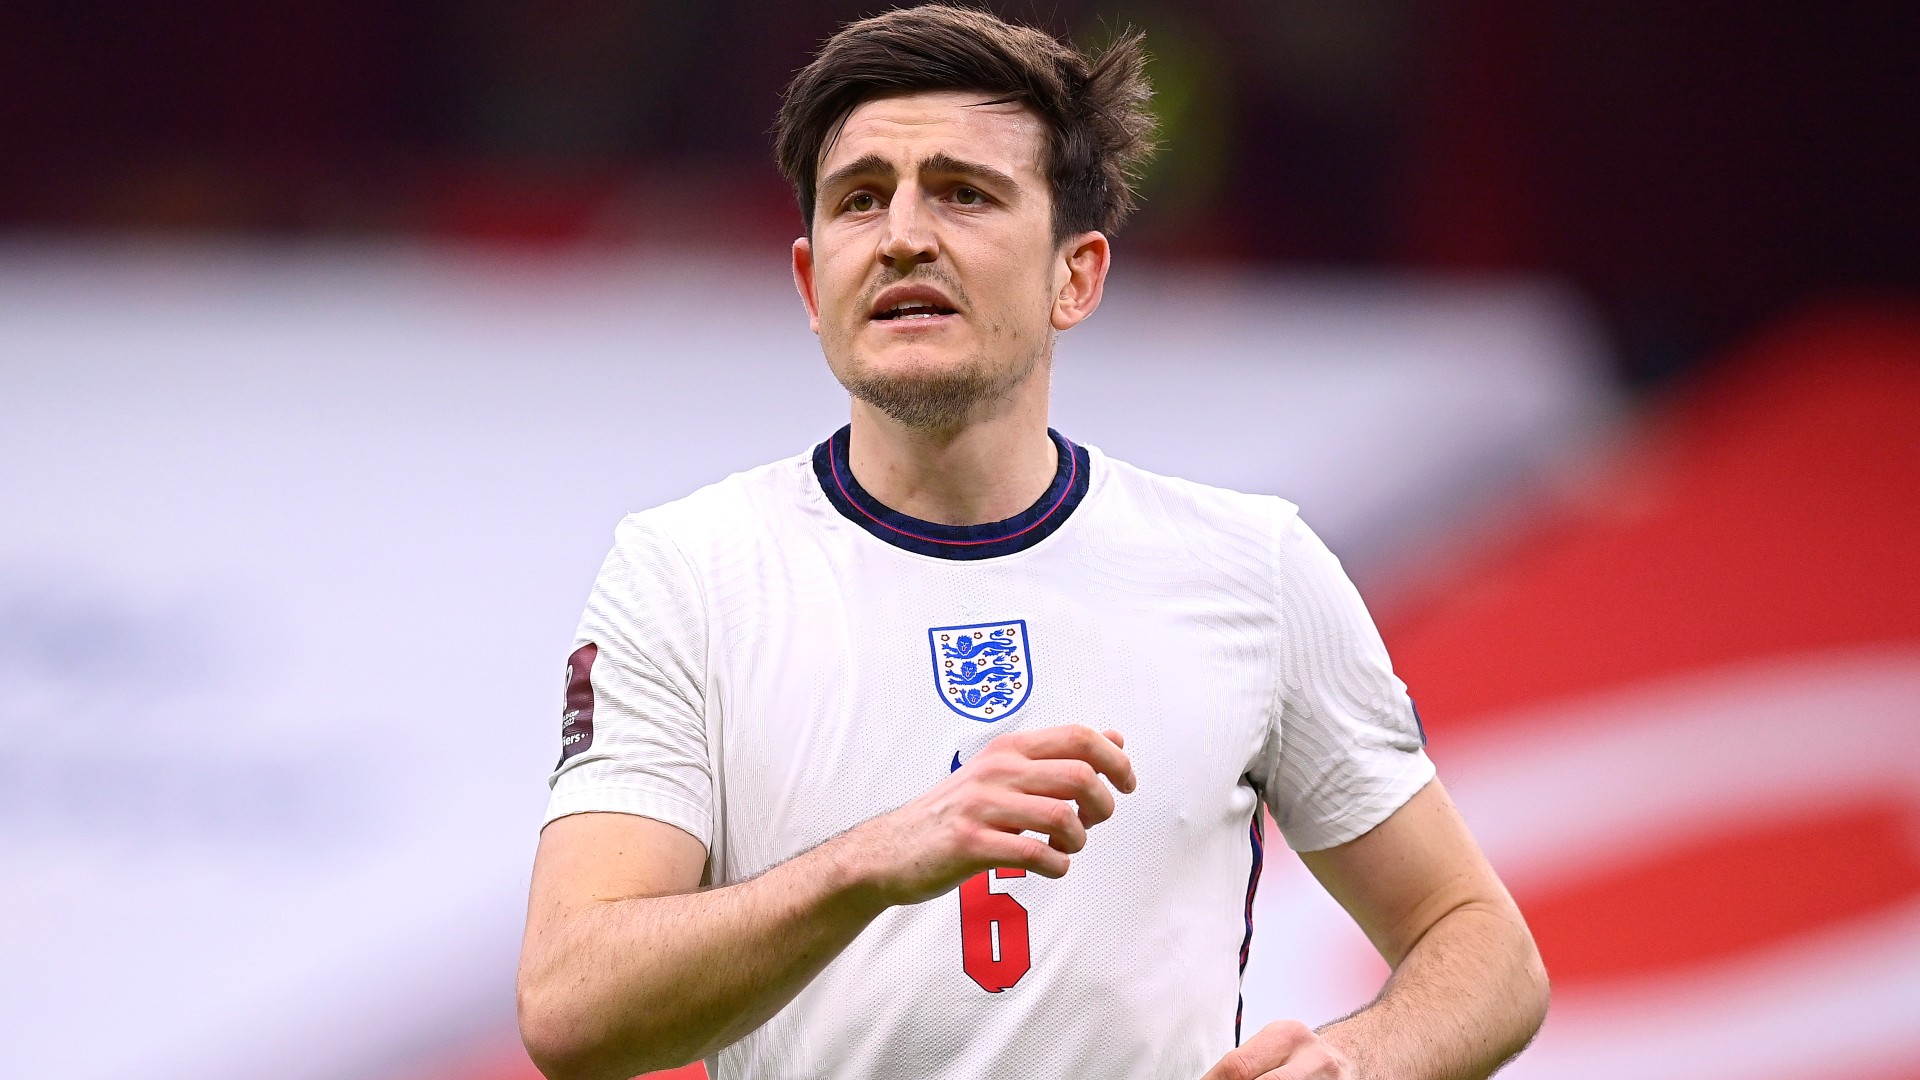 Maguire reveals his father was injured in Wembley stampede prior to